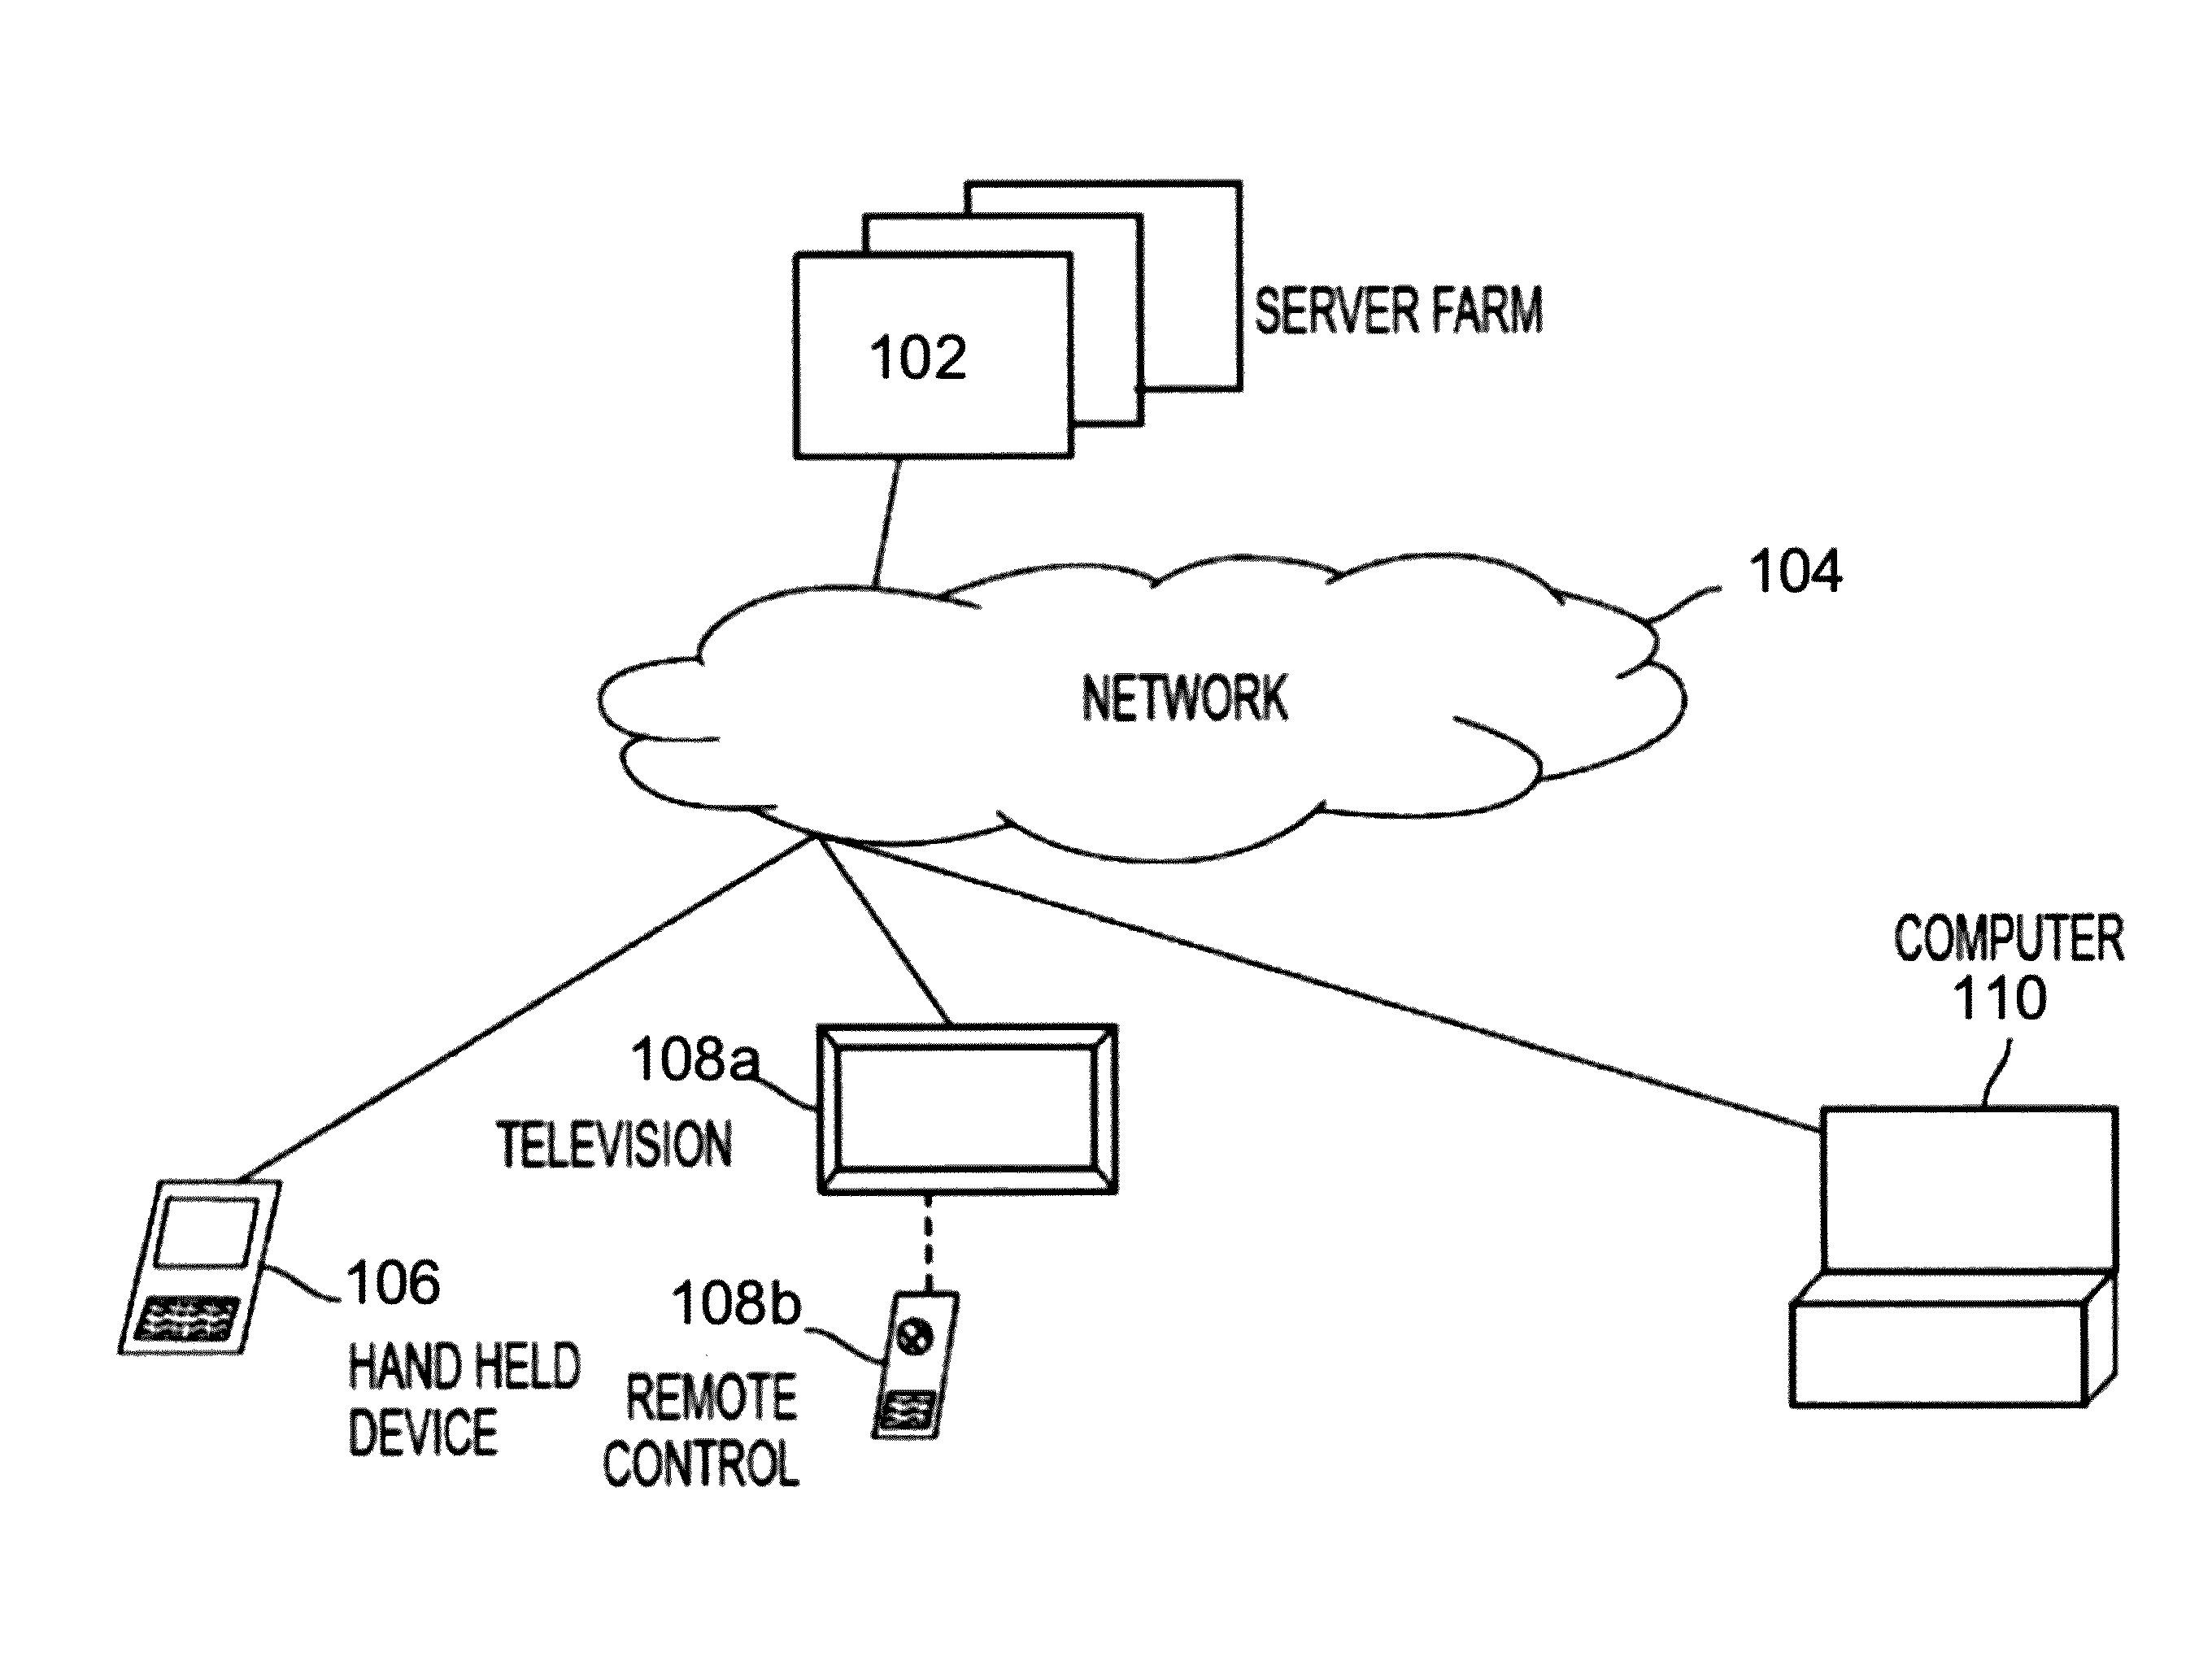 Method of and system for conducting personalized federated search and presentation of results therefrom